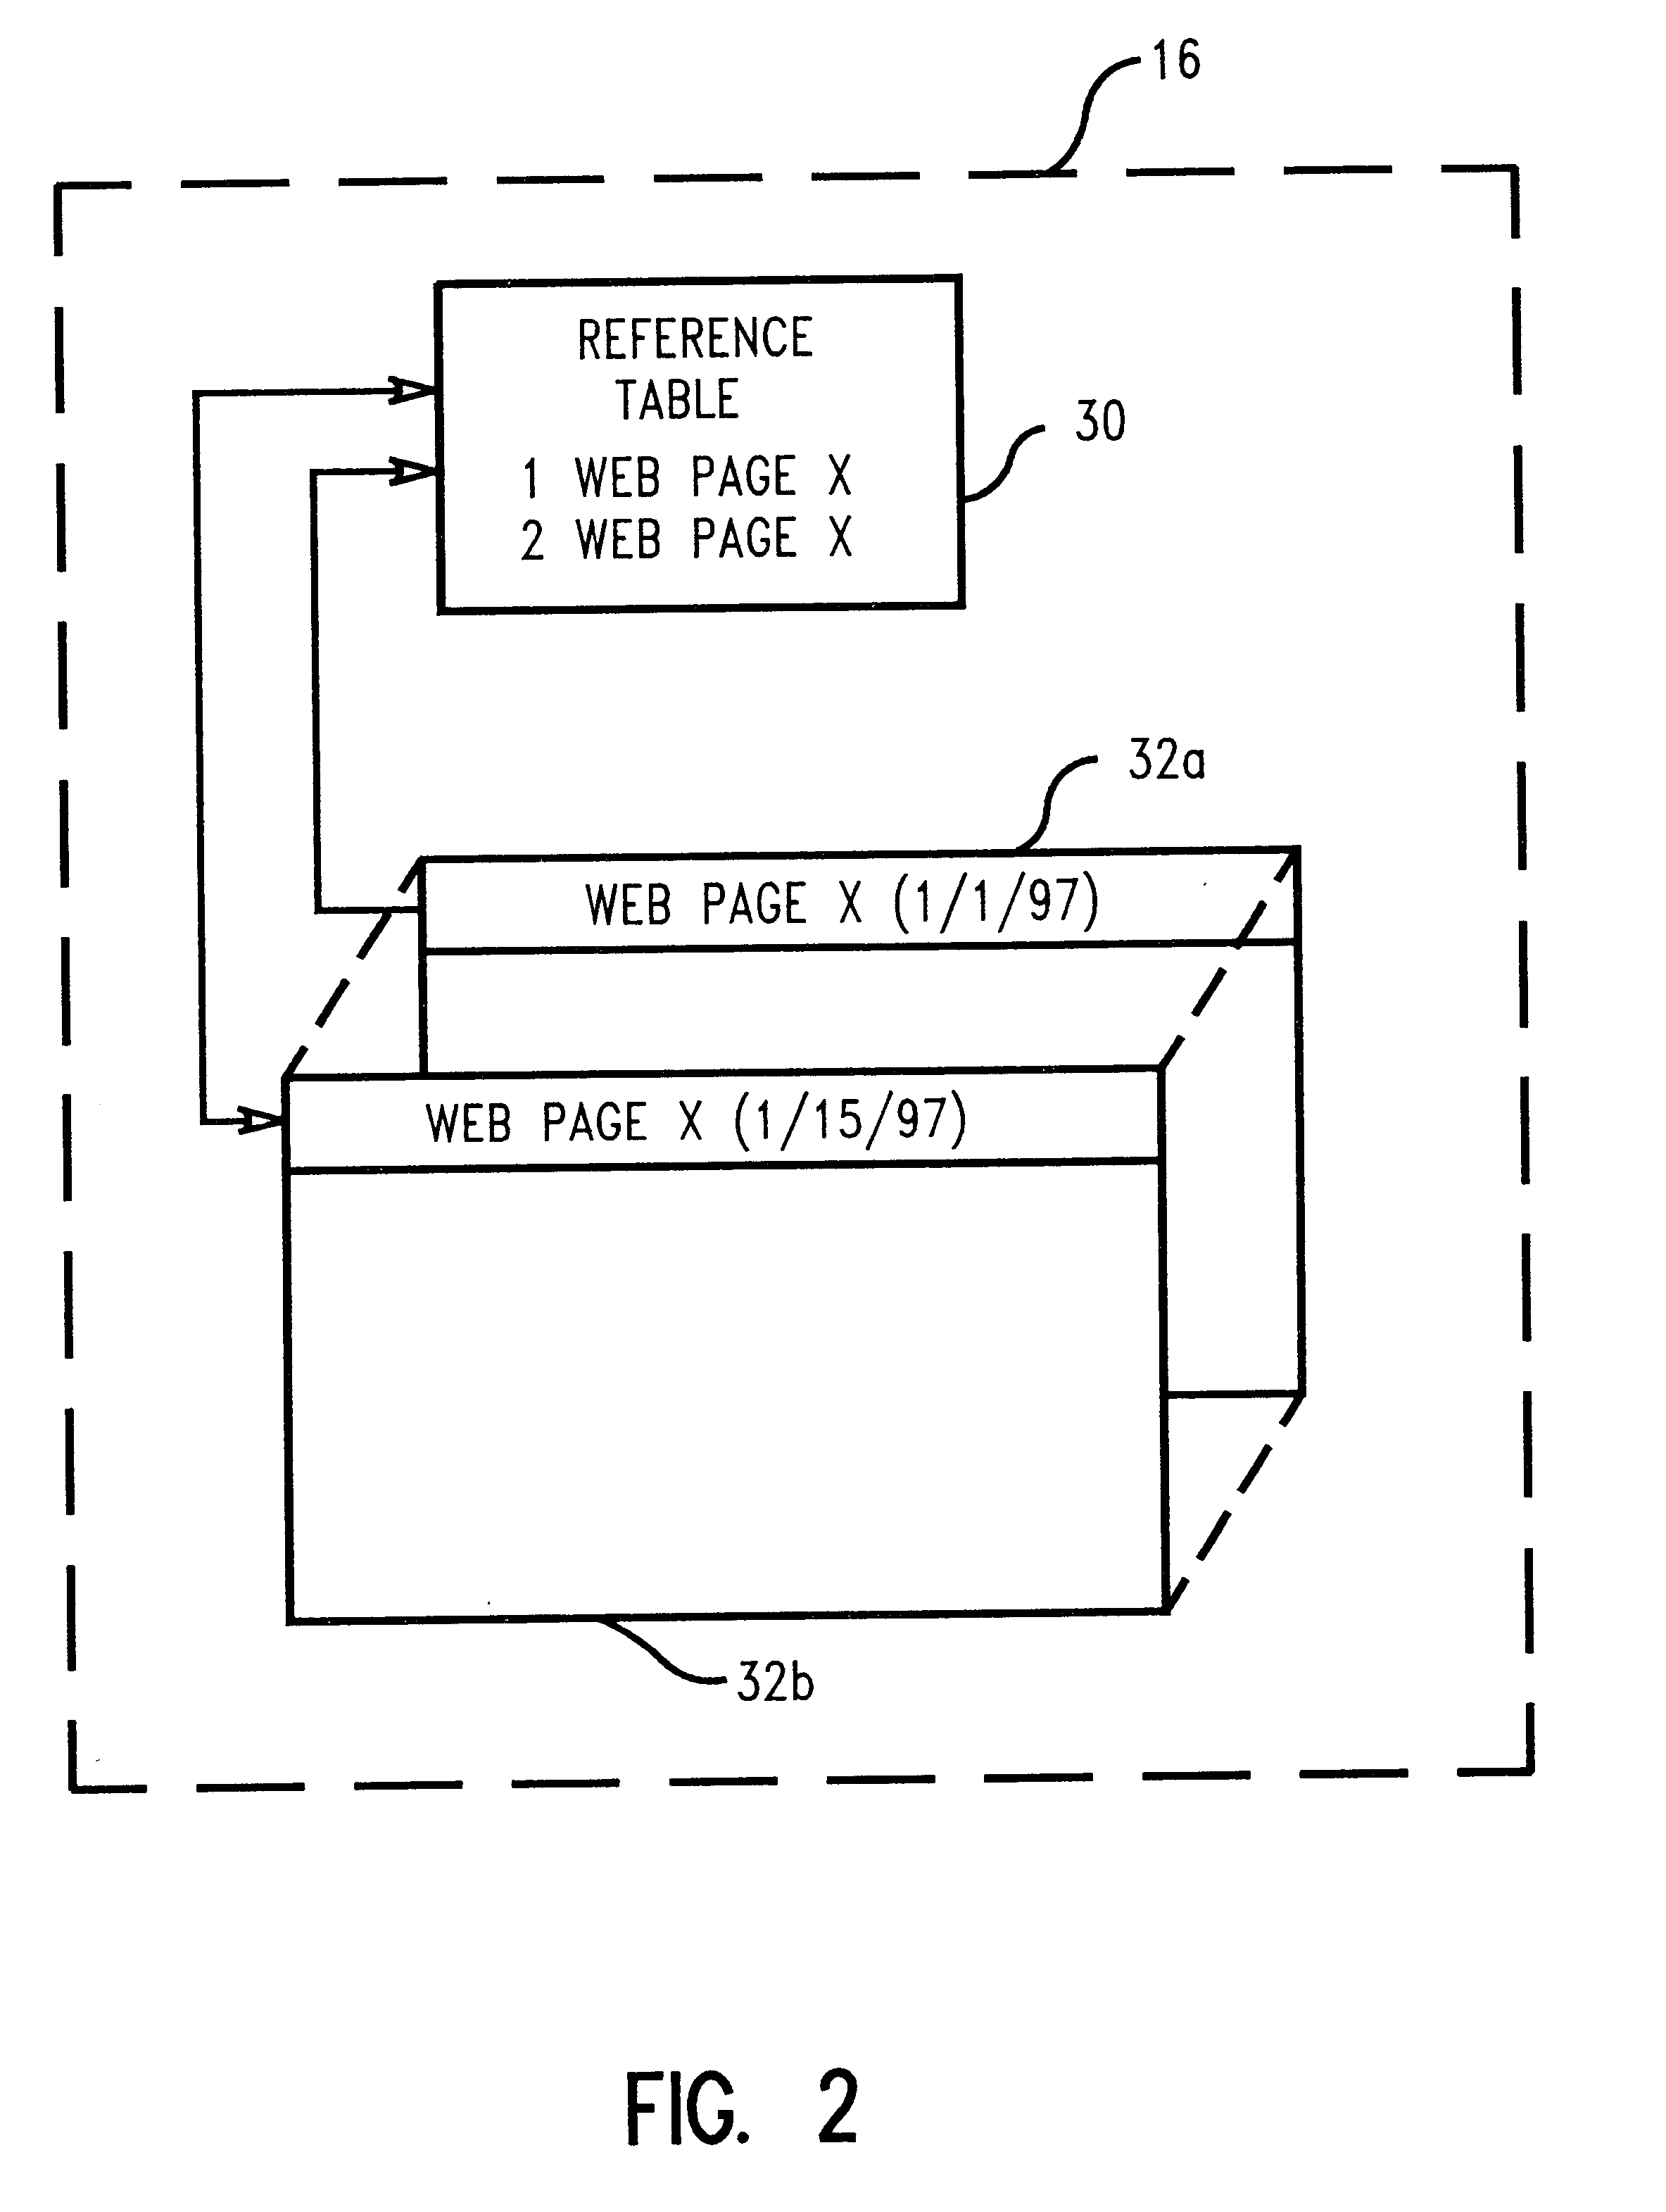 System for personal storage of different web source versions